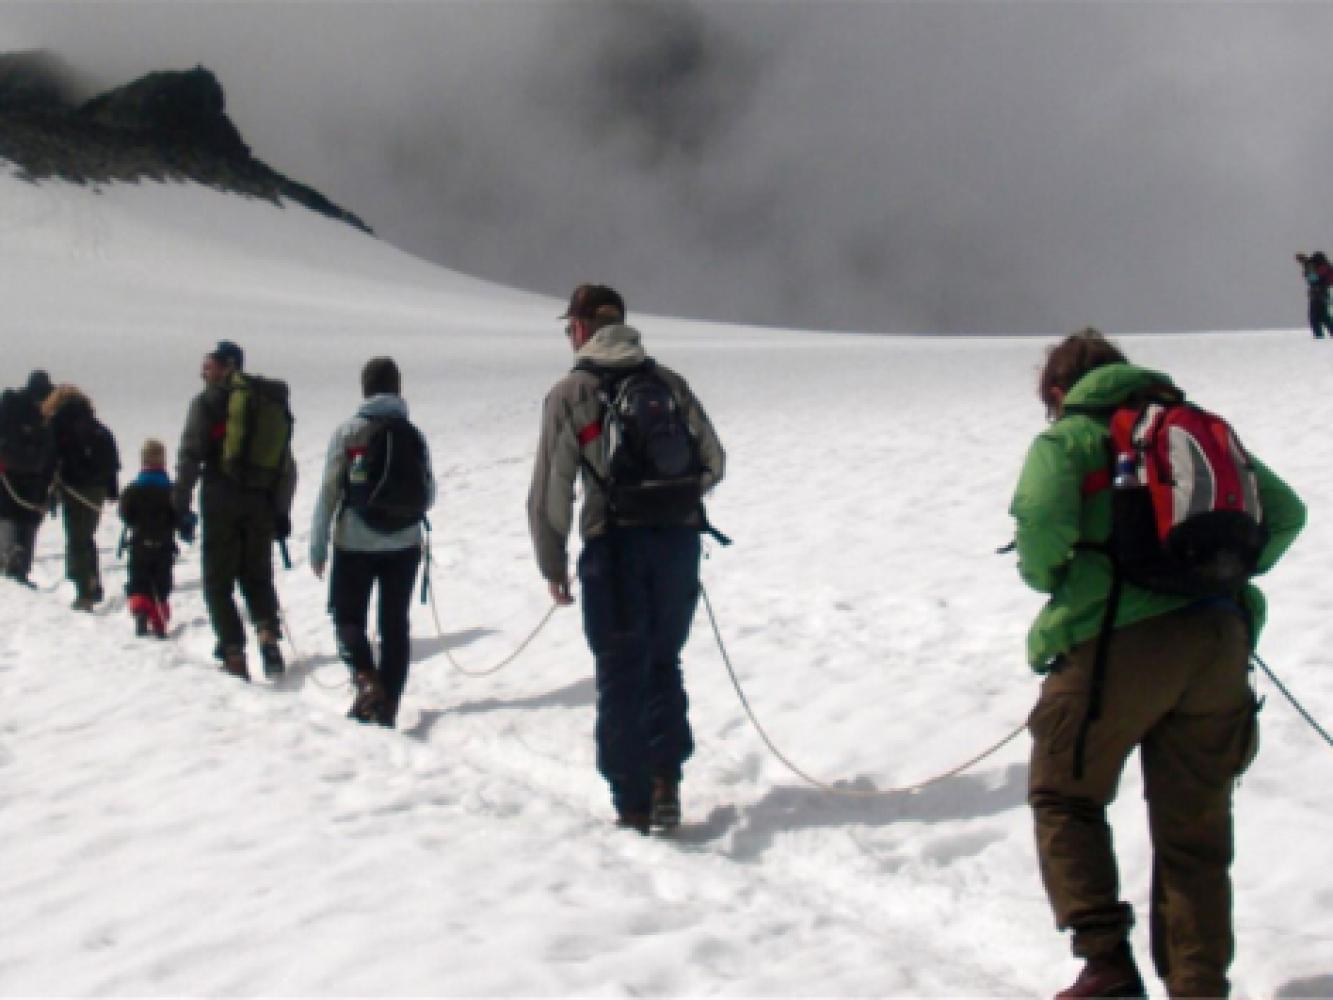 People walking up a snowy mountain on a guided tour